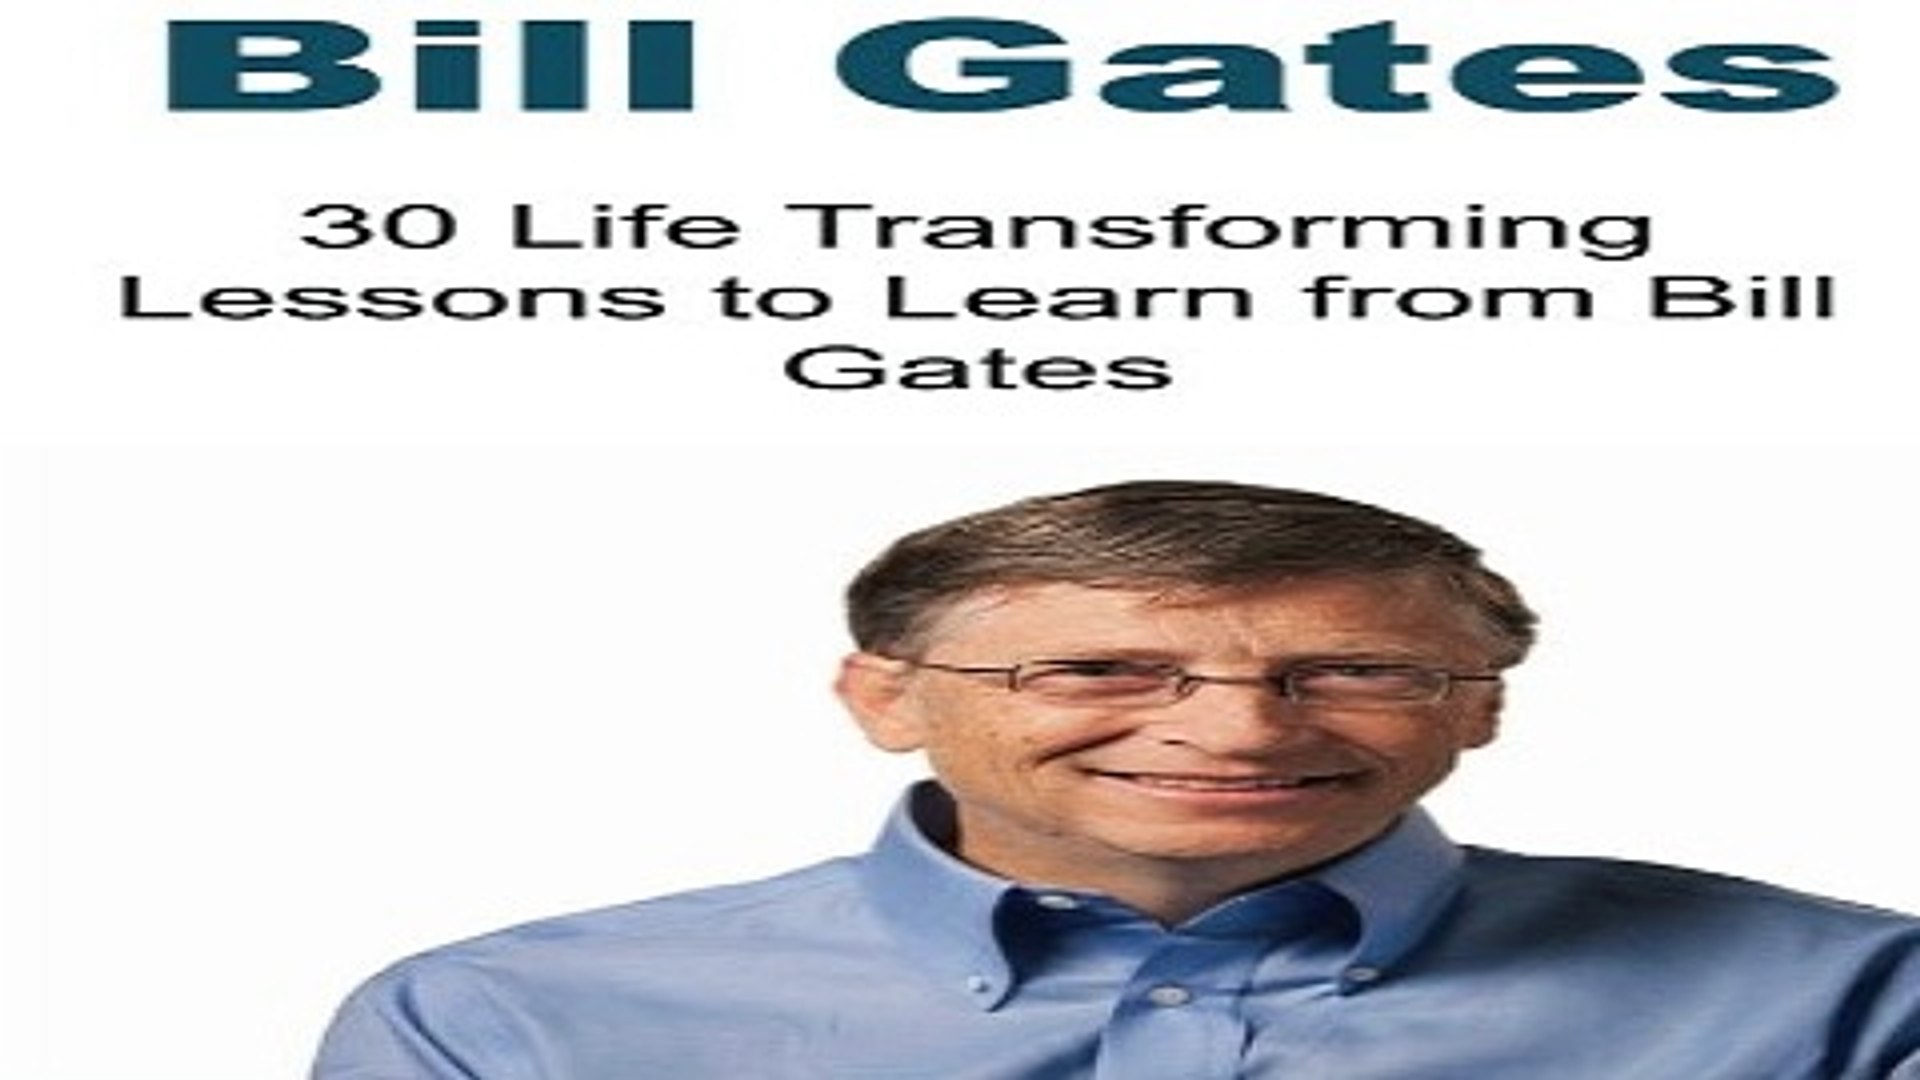 Bill Gates  30 Life Transforming Lessons to Learn from Bill Gates  Bill Gates  Bill Gates Books